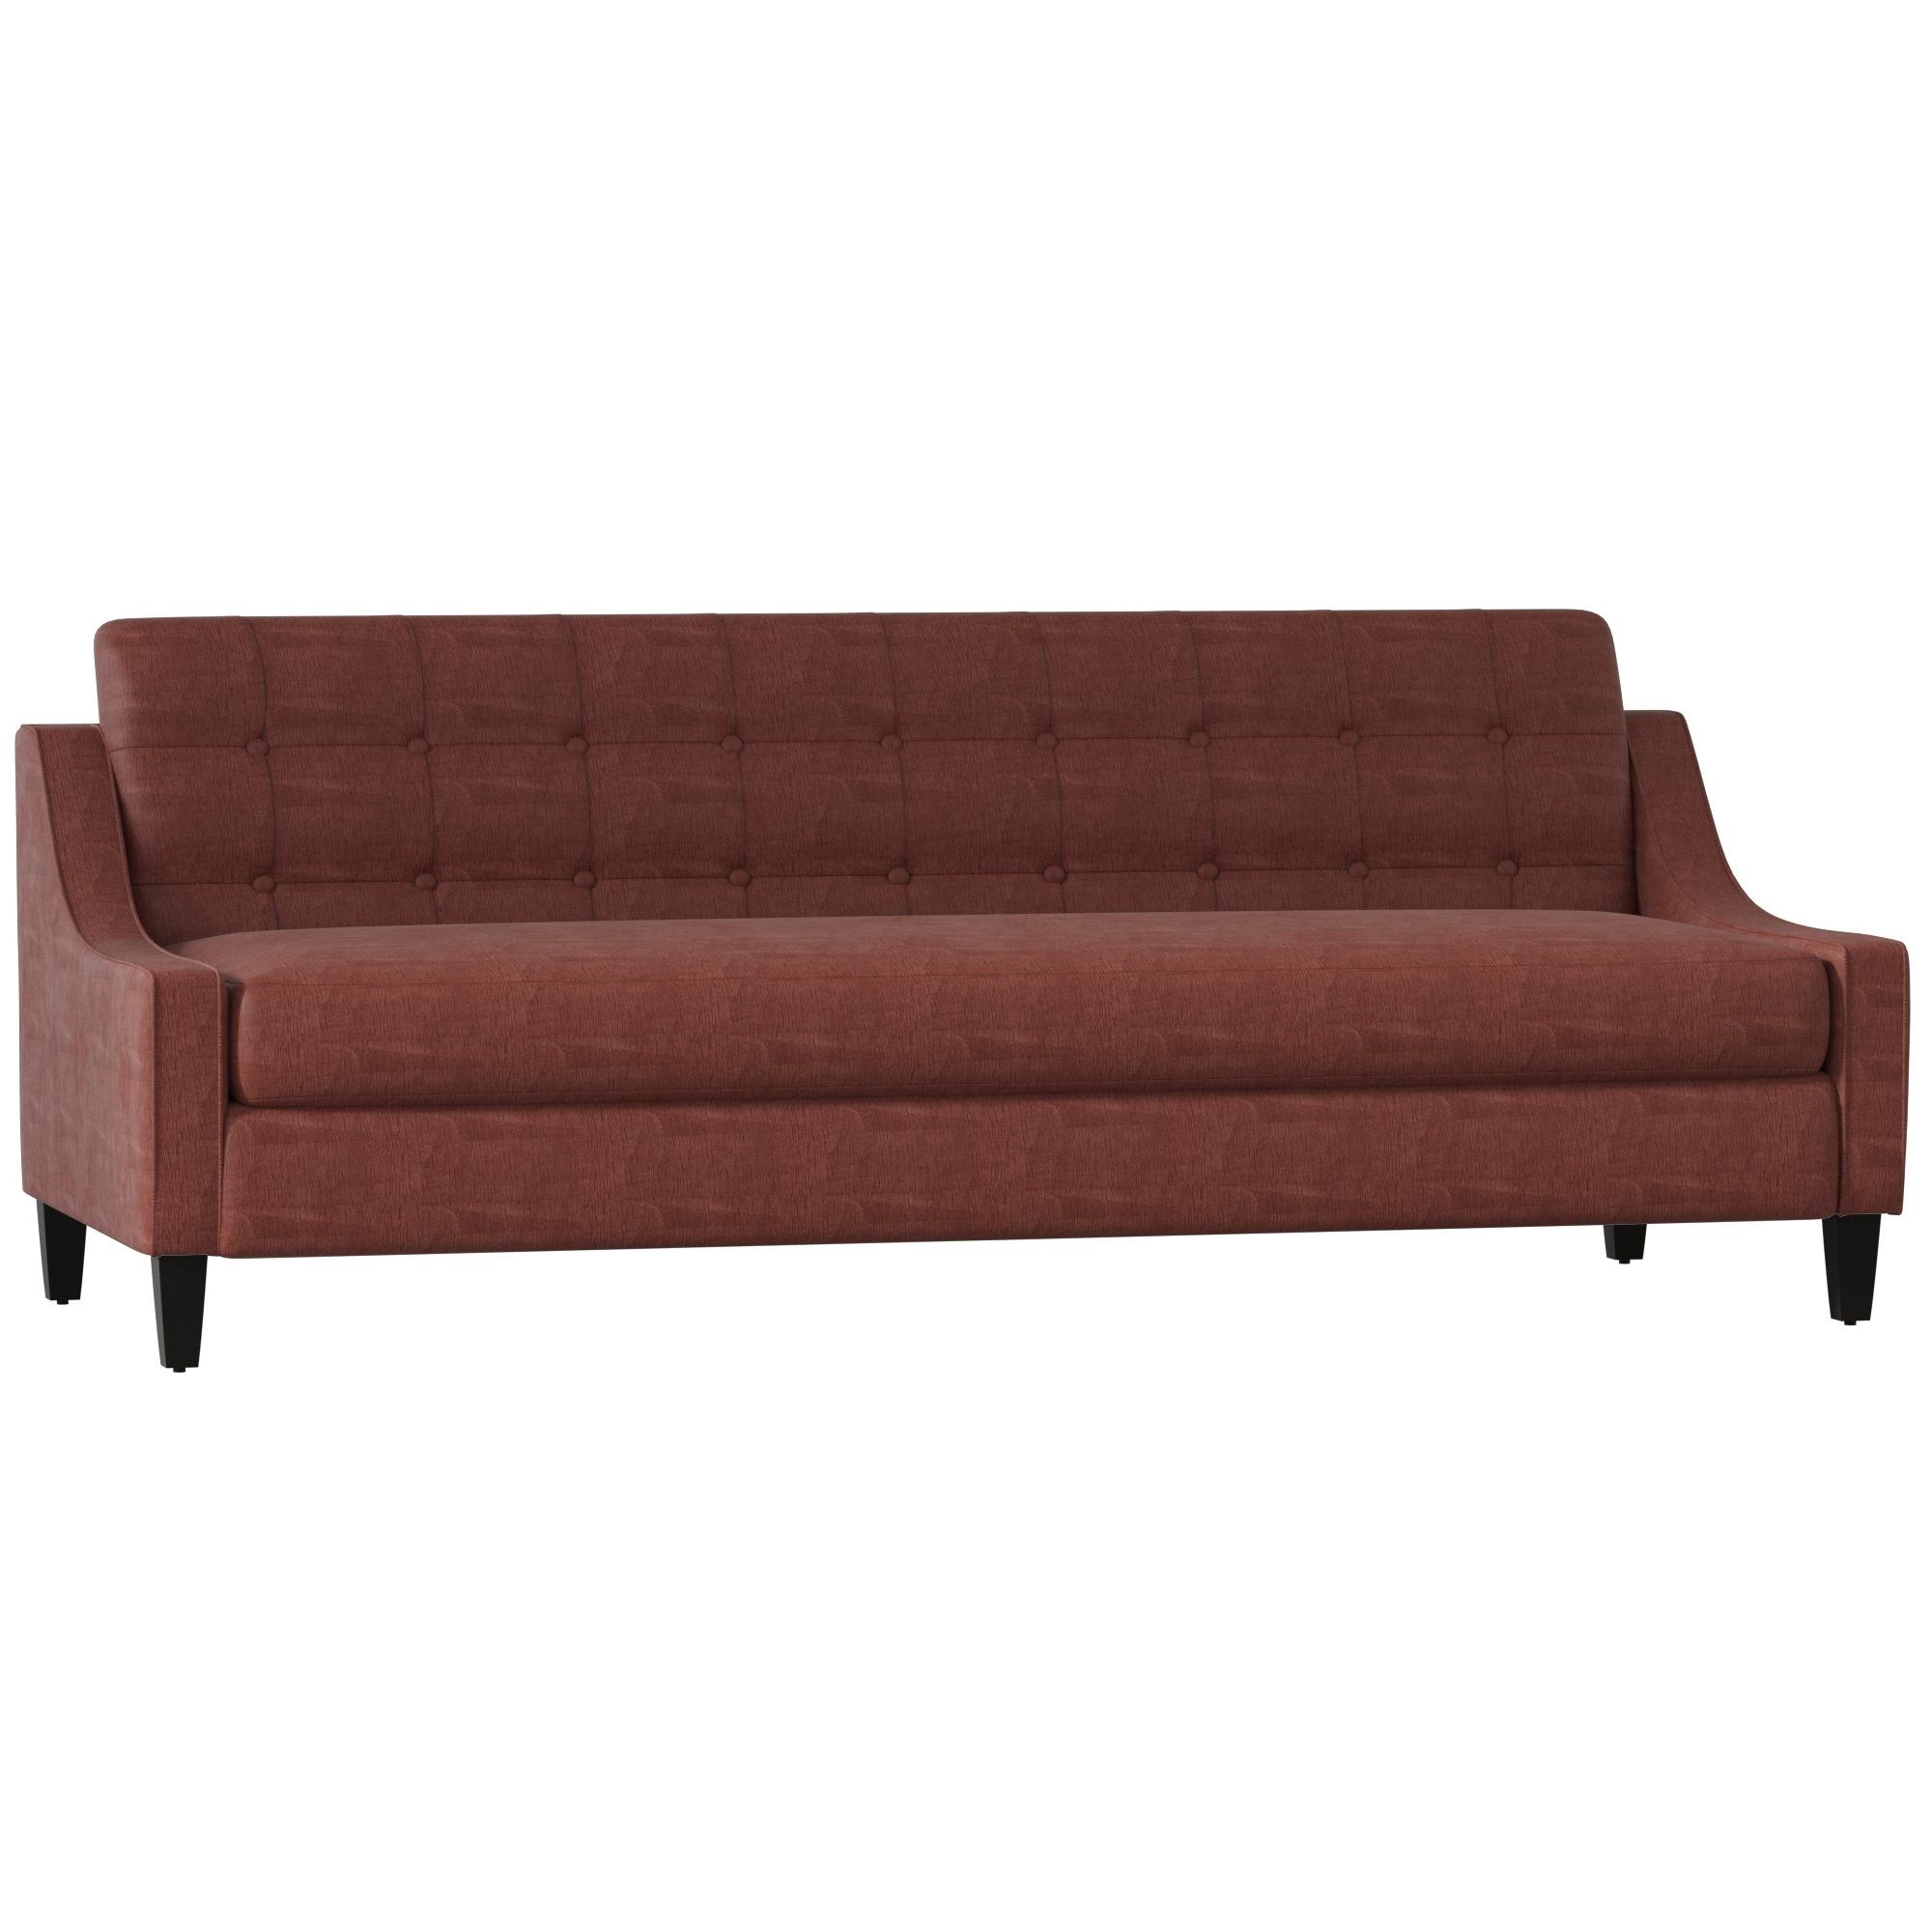 Famous Walden Sofa & Reviews (View 13 of 20)